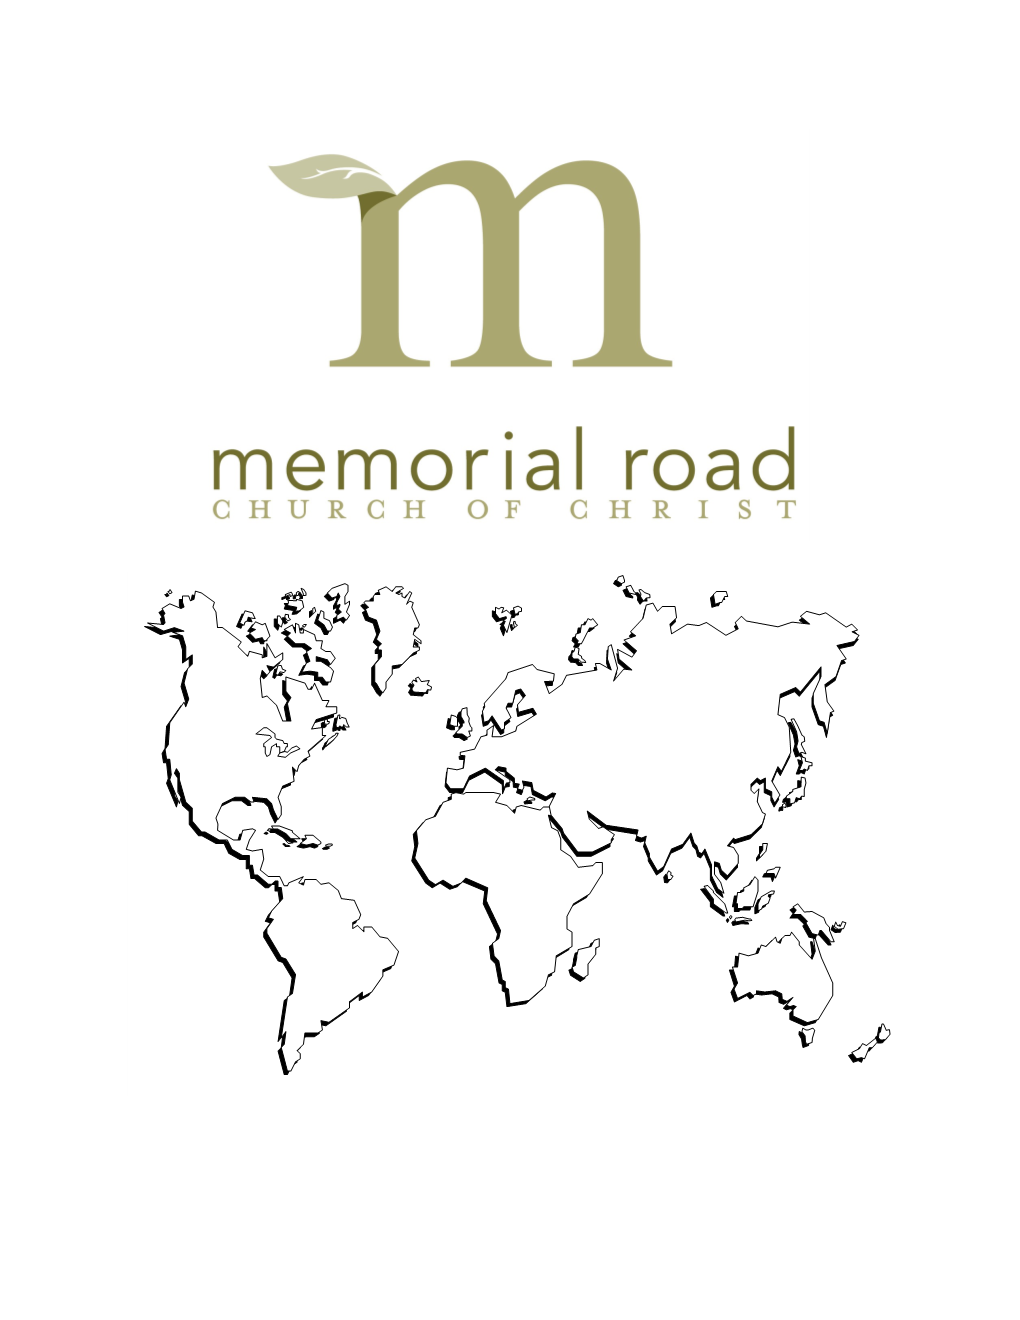 The Mission Statement of the Memorial Road Church's Foreign Missions Ministry